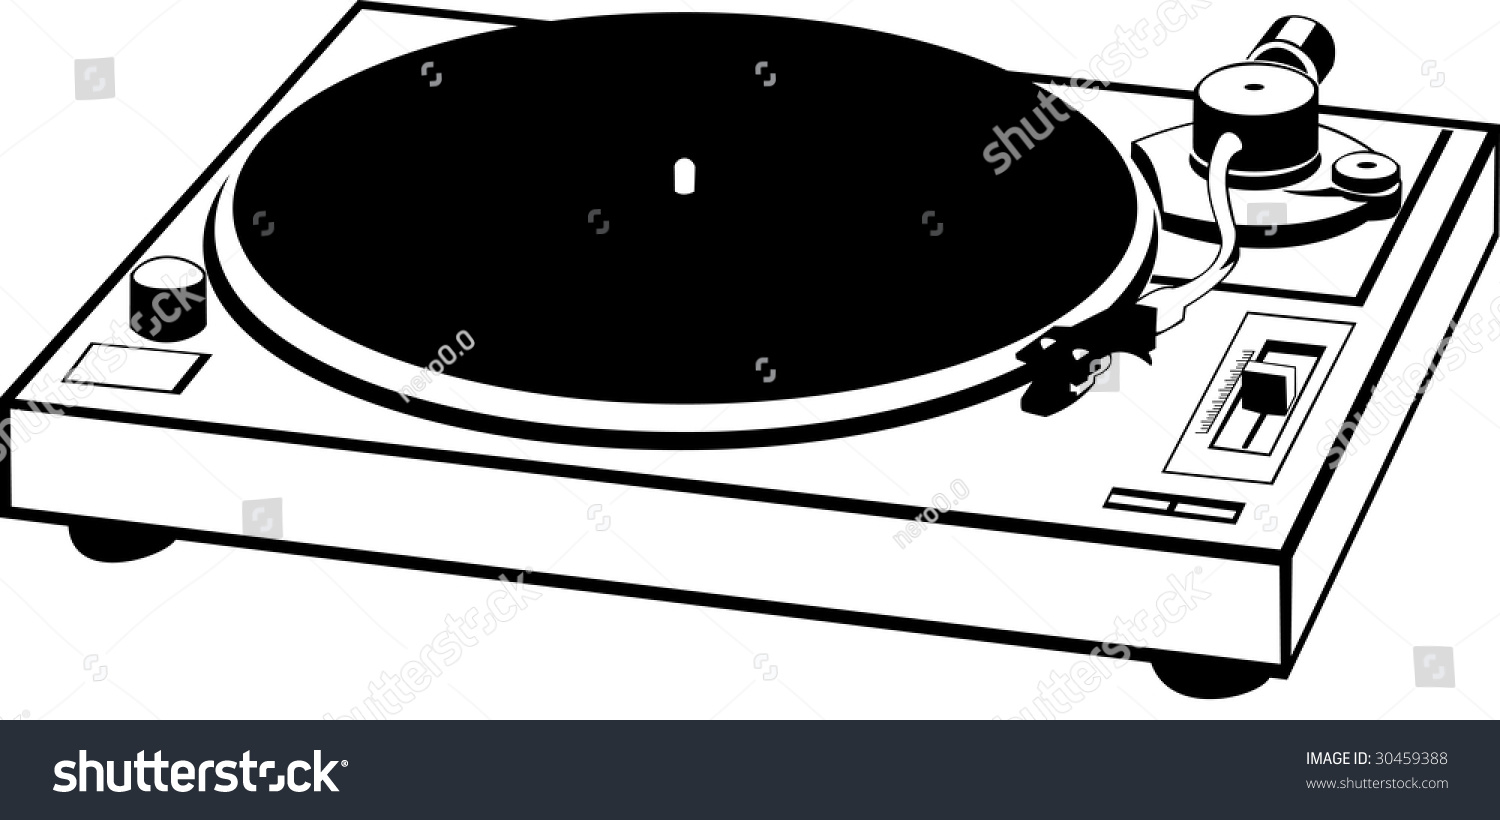 Drawn Of A Record Player Stock Photo 30459388 : Shutterstock